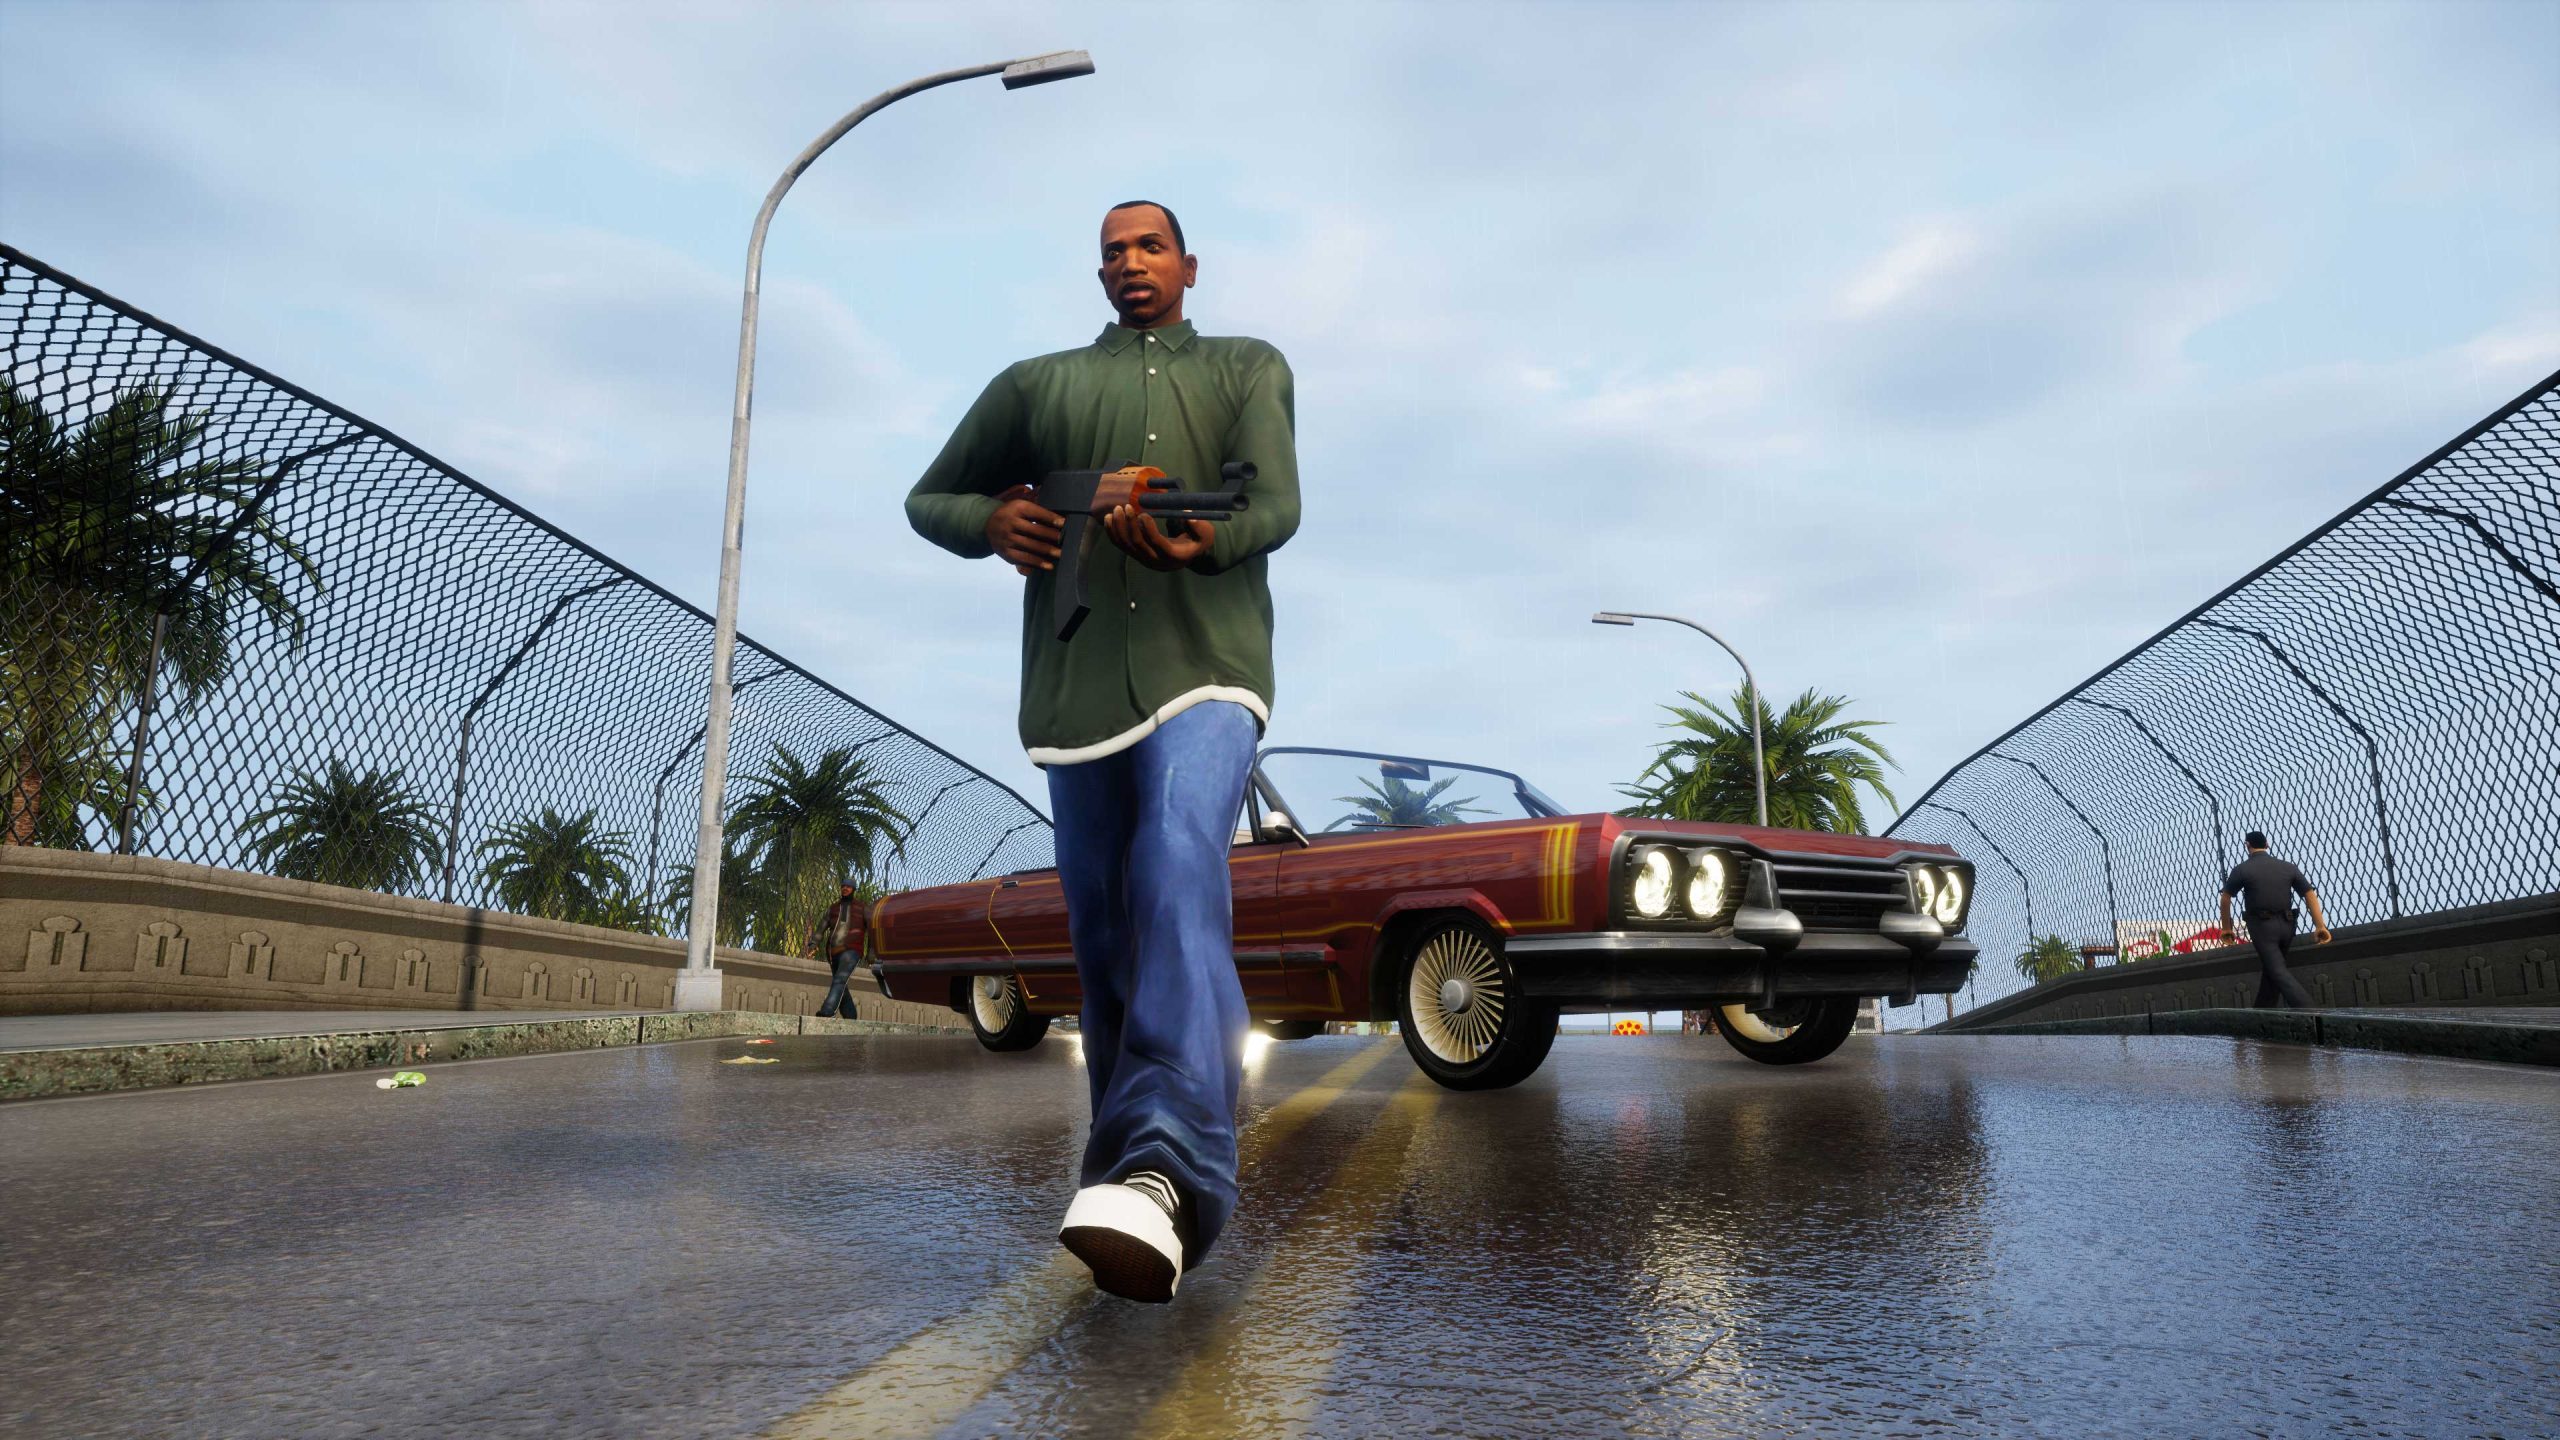 grand-theft-auto-the-trilogy-the-definitive-edition-pc-image-scaled-1158089